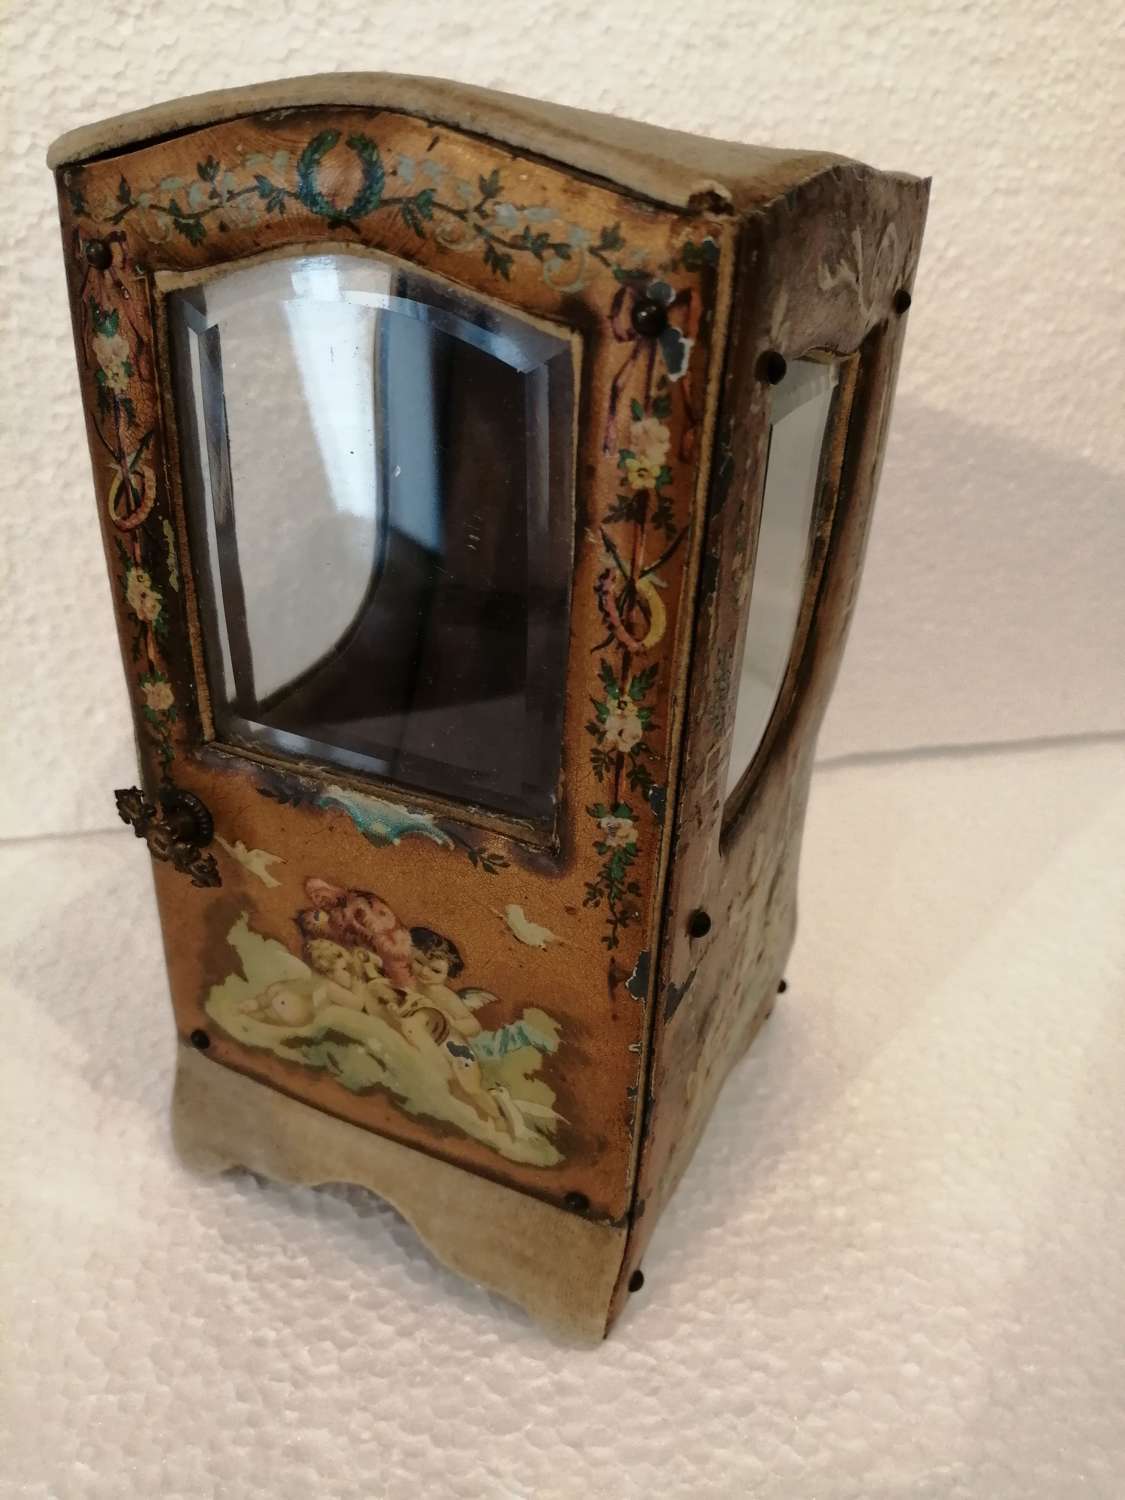 A fine French sedan chair novelty watch stand